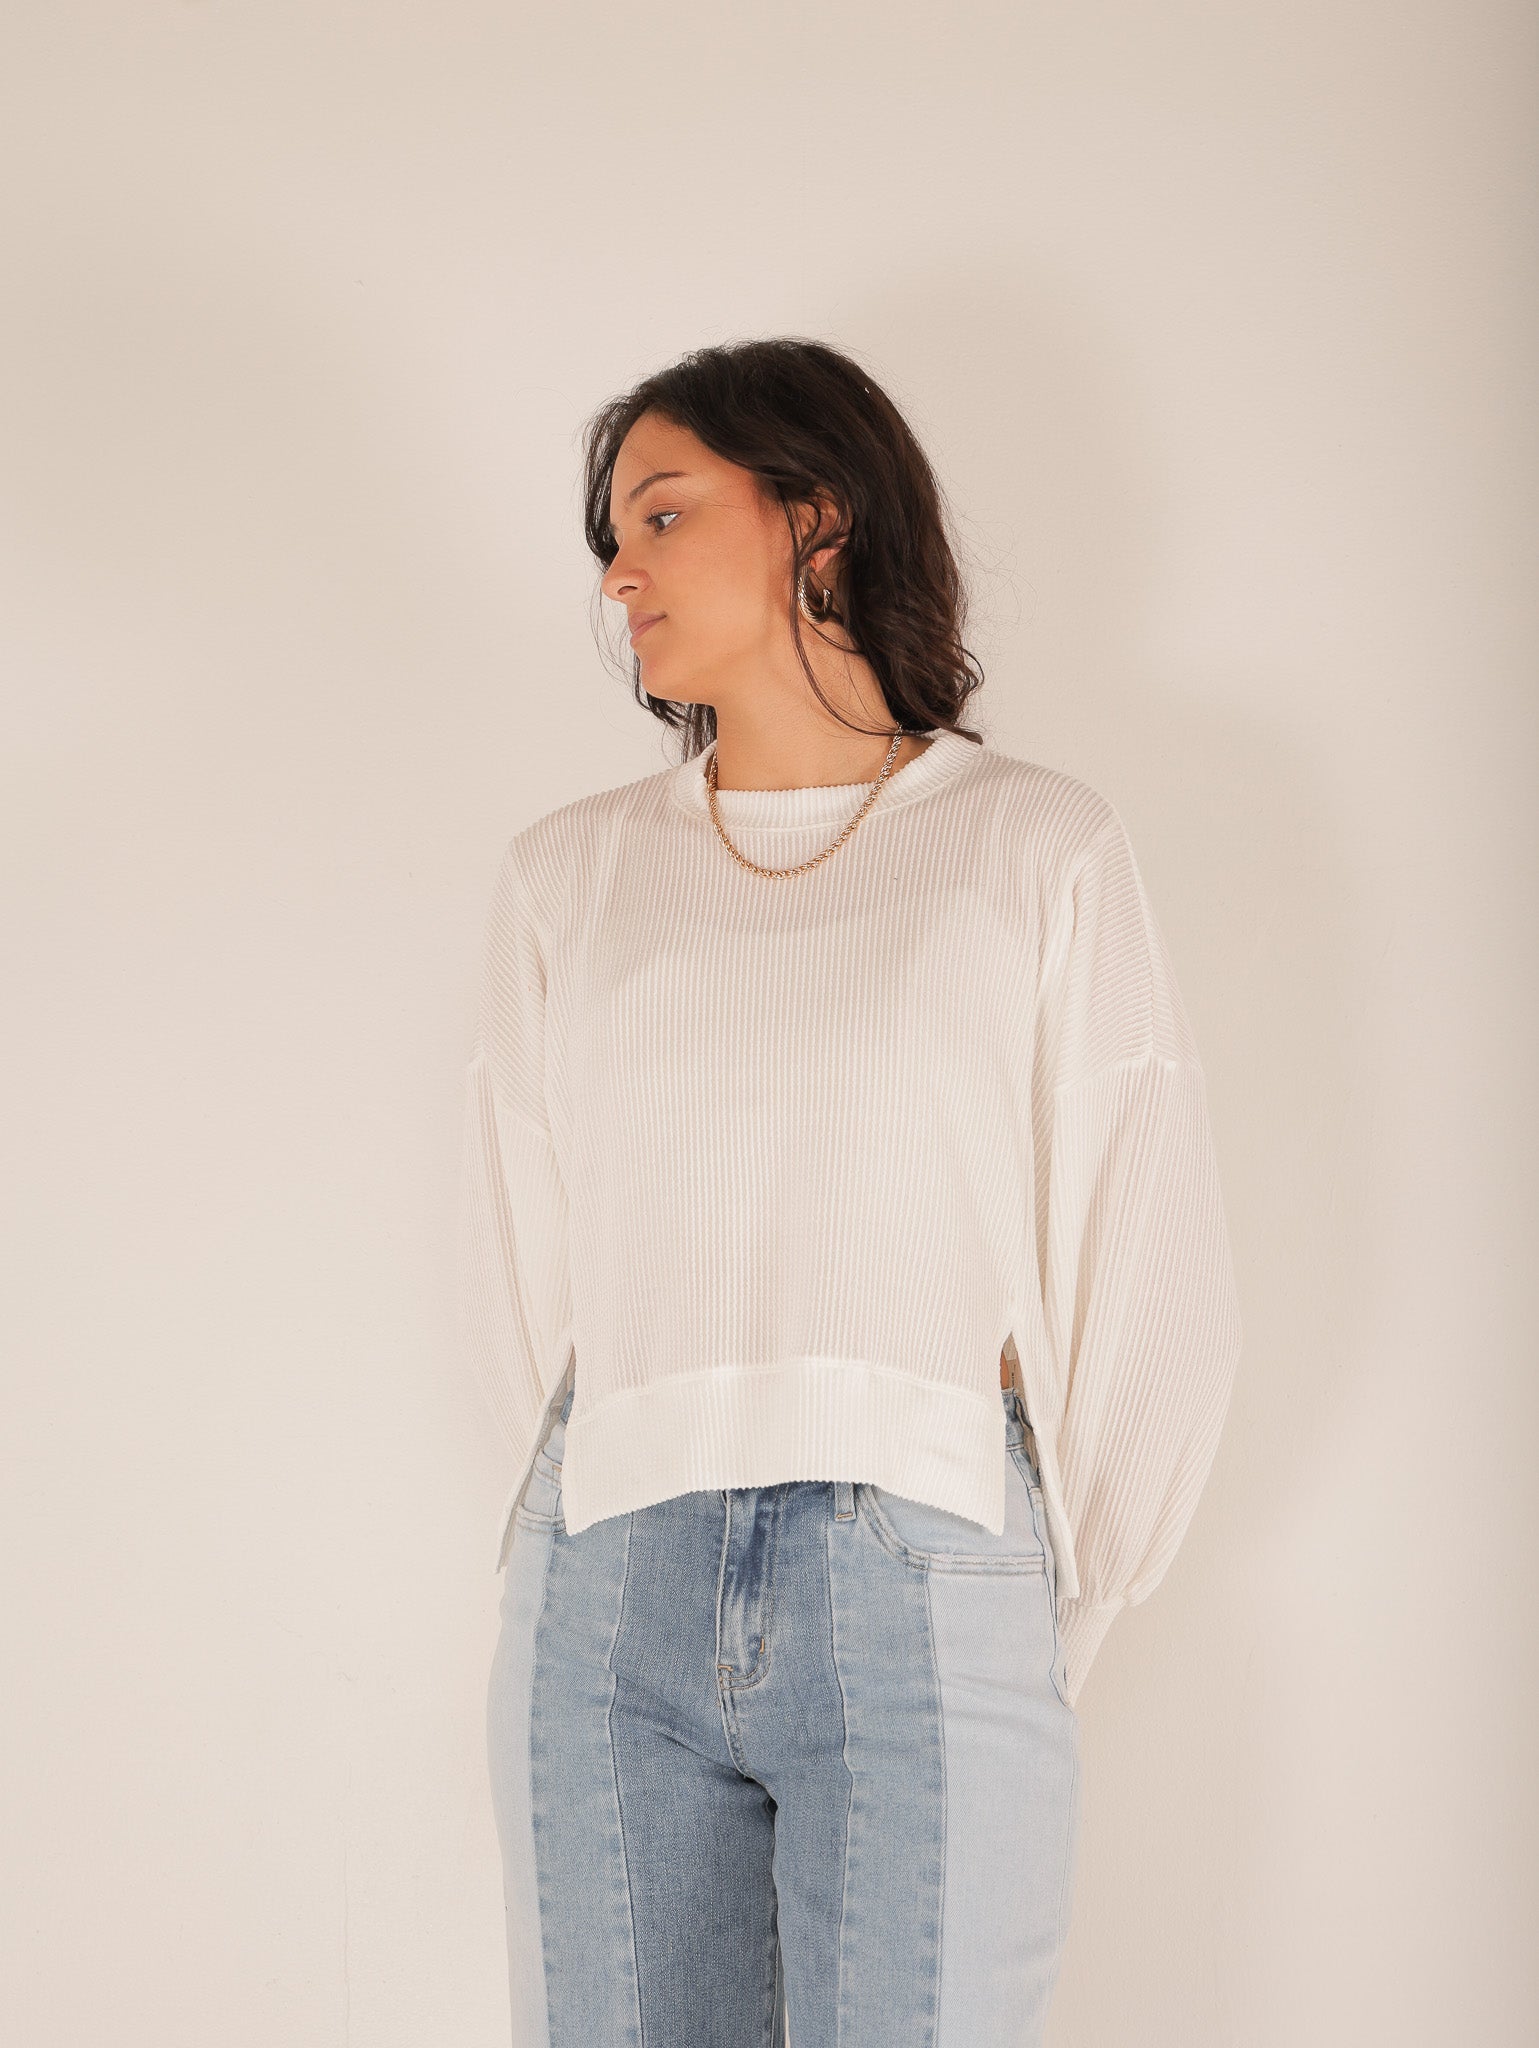 Molly Green - Stacey Long Sleeve - Casual_Tops